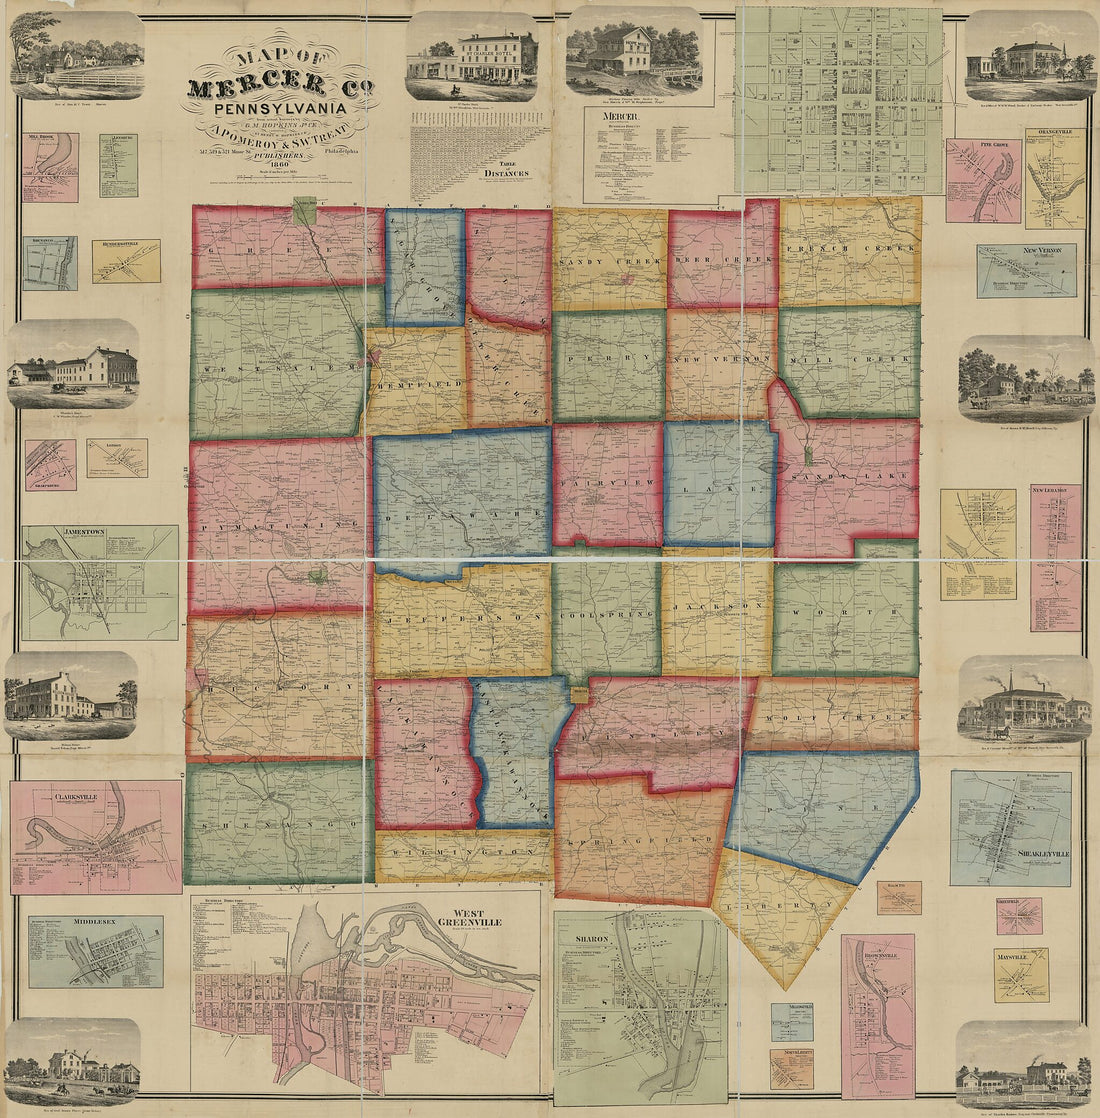 This old map of Map of Mercer County, Pennsylvania : from Actual Surveys from 1860 was created by  A. Pomeroy &amp; S.W. Treat, Griffith Morgan Hopkins, H. W. (Henry Whitmer) Hopkins, A. Pomeroy in 1860